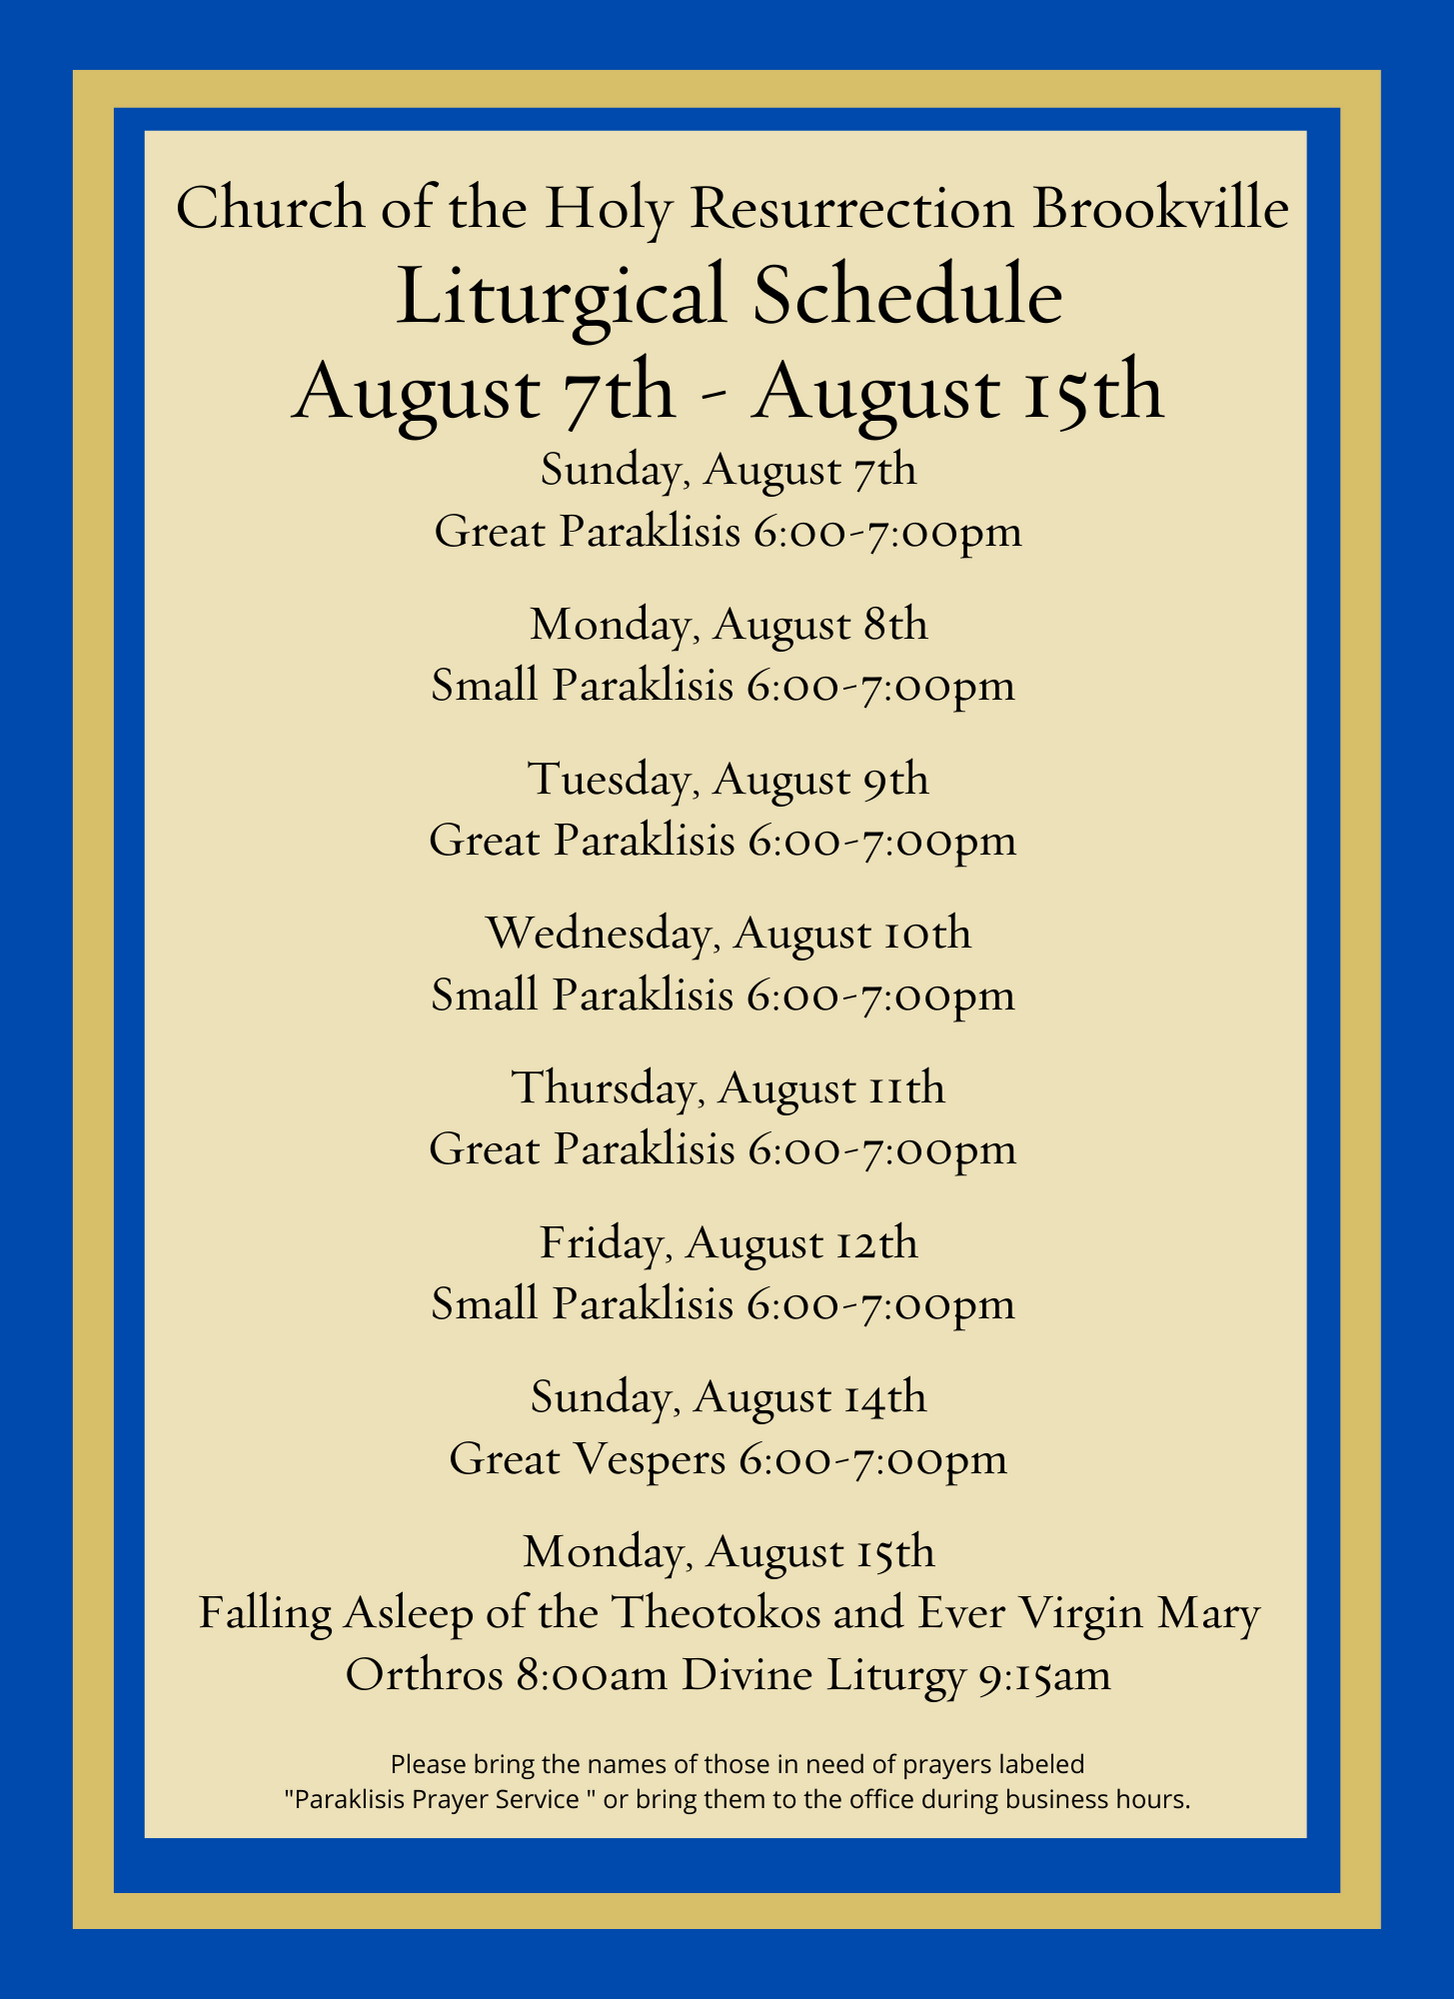 Liturgical Schedule for the Dormition of the Theotokos